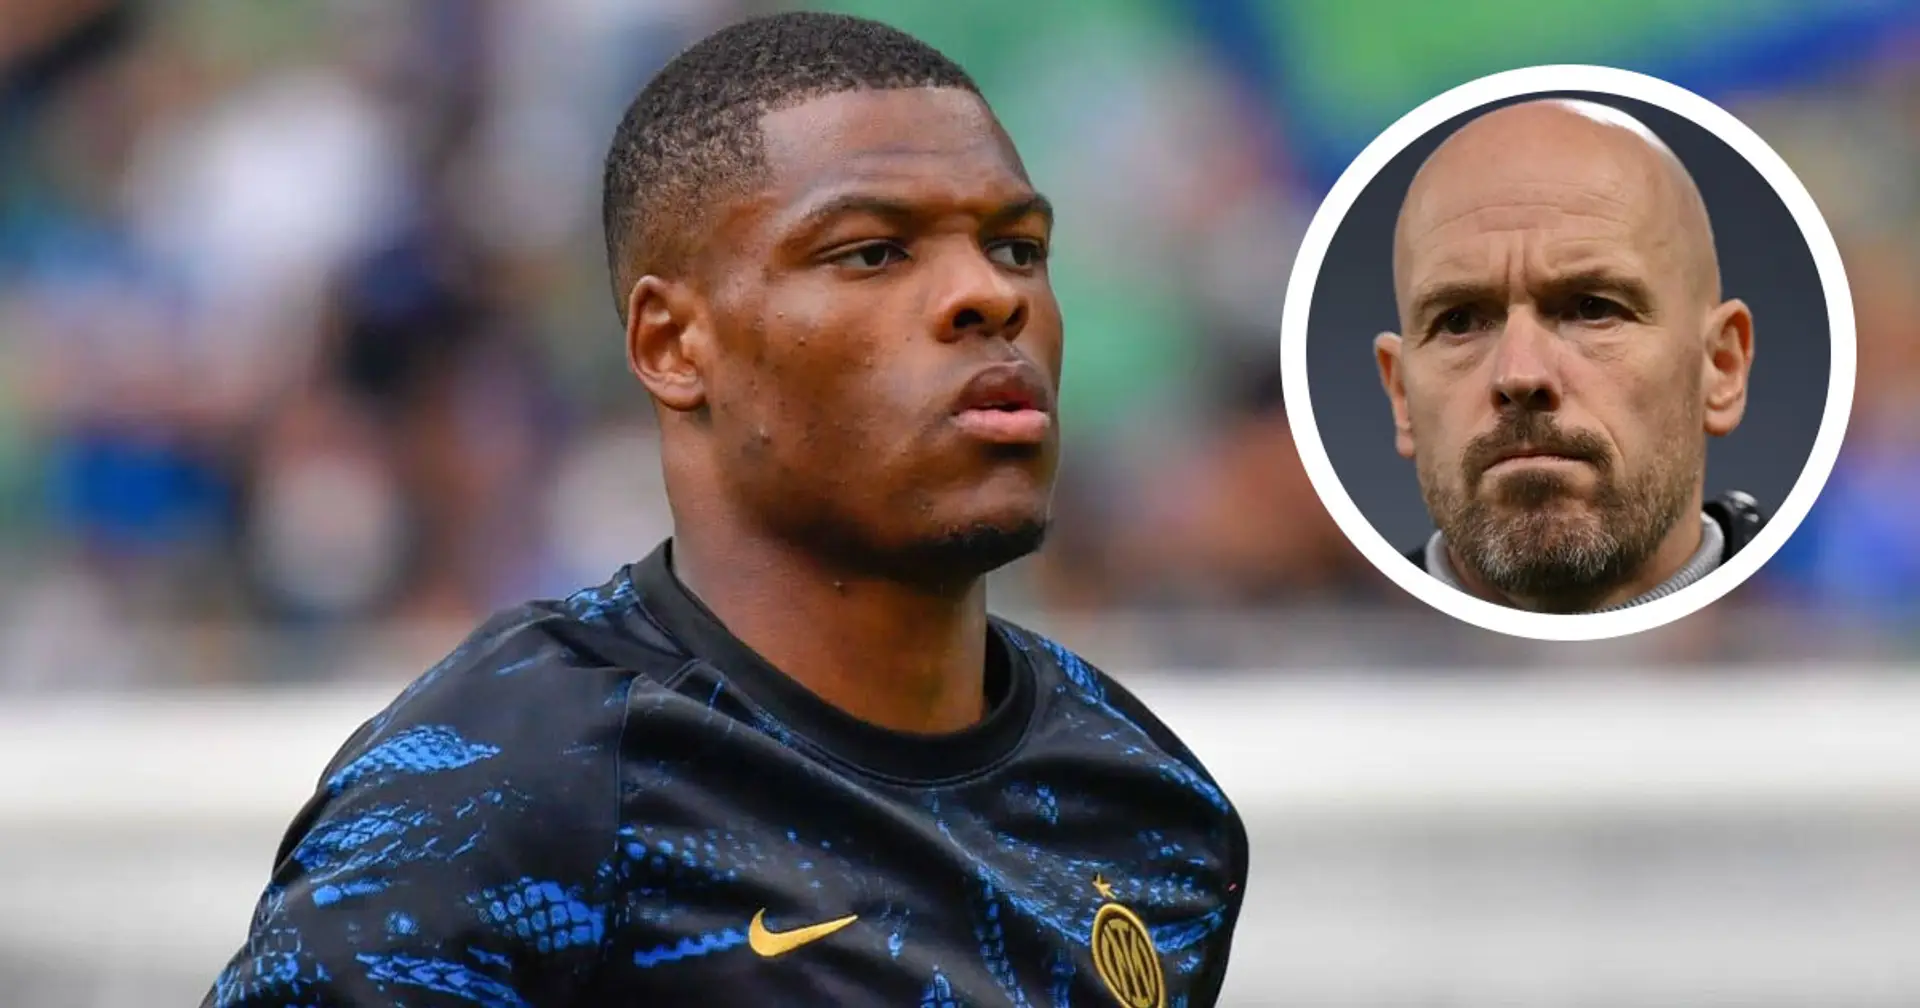 Ten Hag personally 'pushing' to sign Denzel Dumfries (reliability: 4 stars)